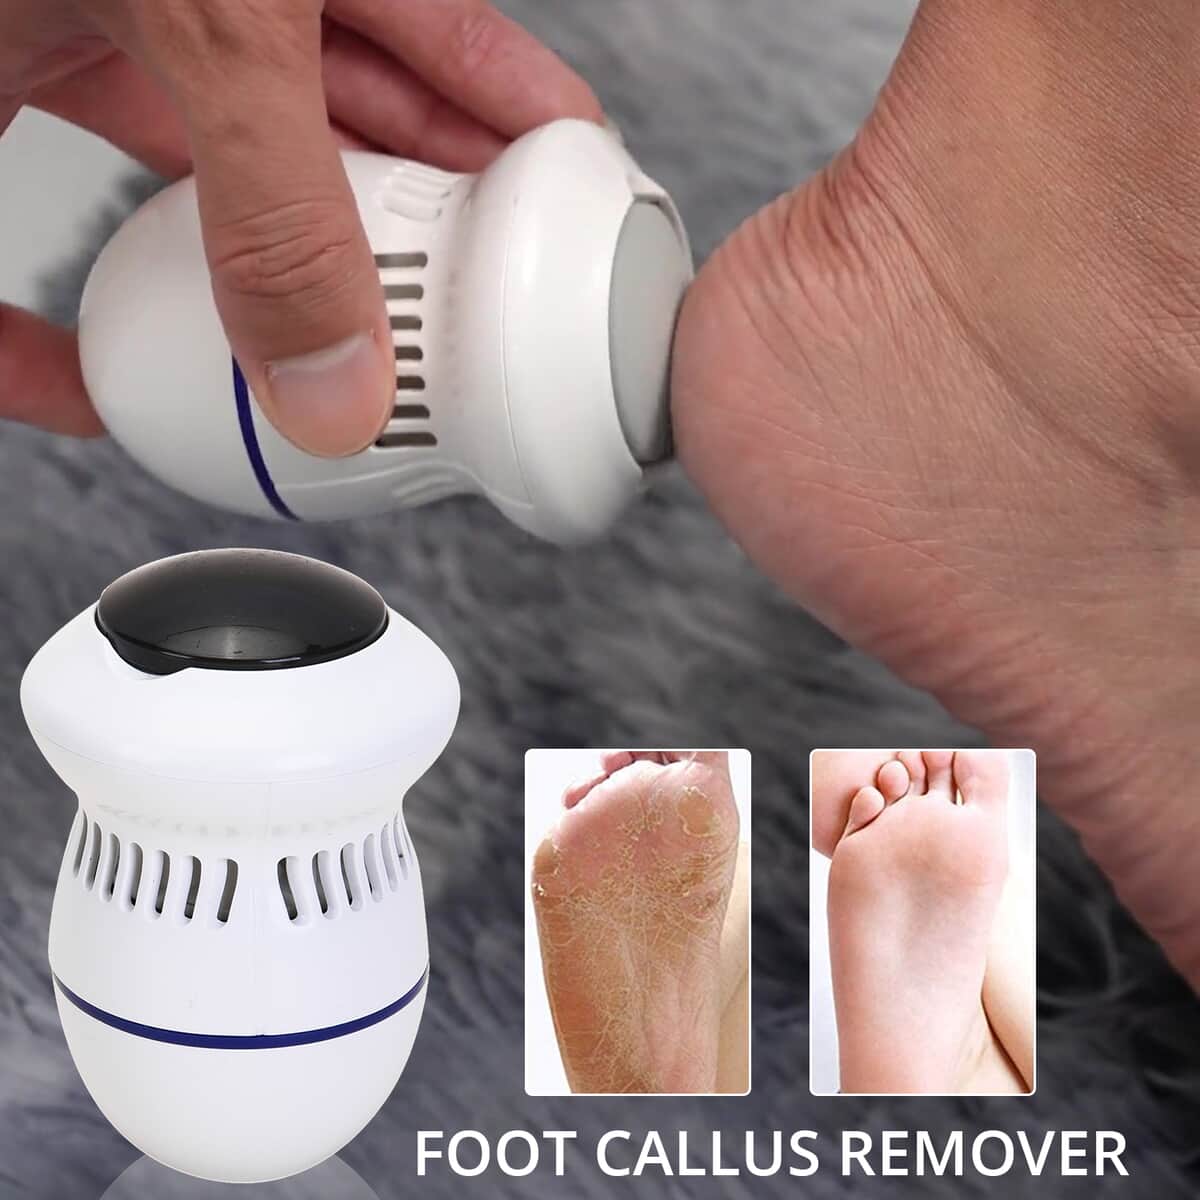 White & Blue Electric Foot Callus Remover with Two Speed Mode (Included: USB Cord, 1 Replaceable Emery Pad) (4.33"x2.95") image number 1